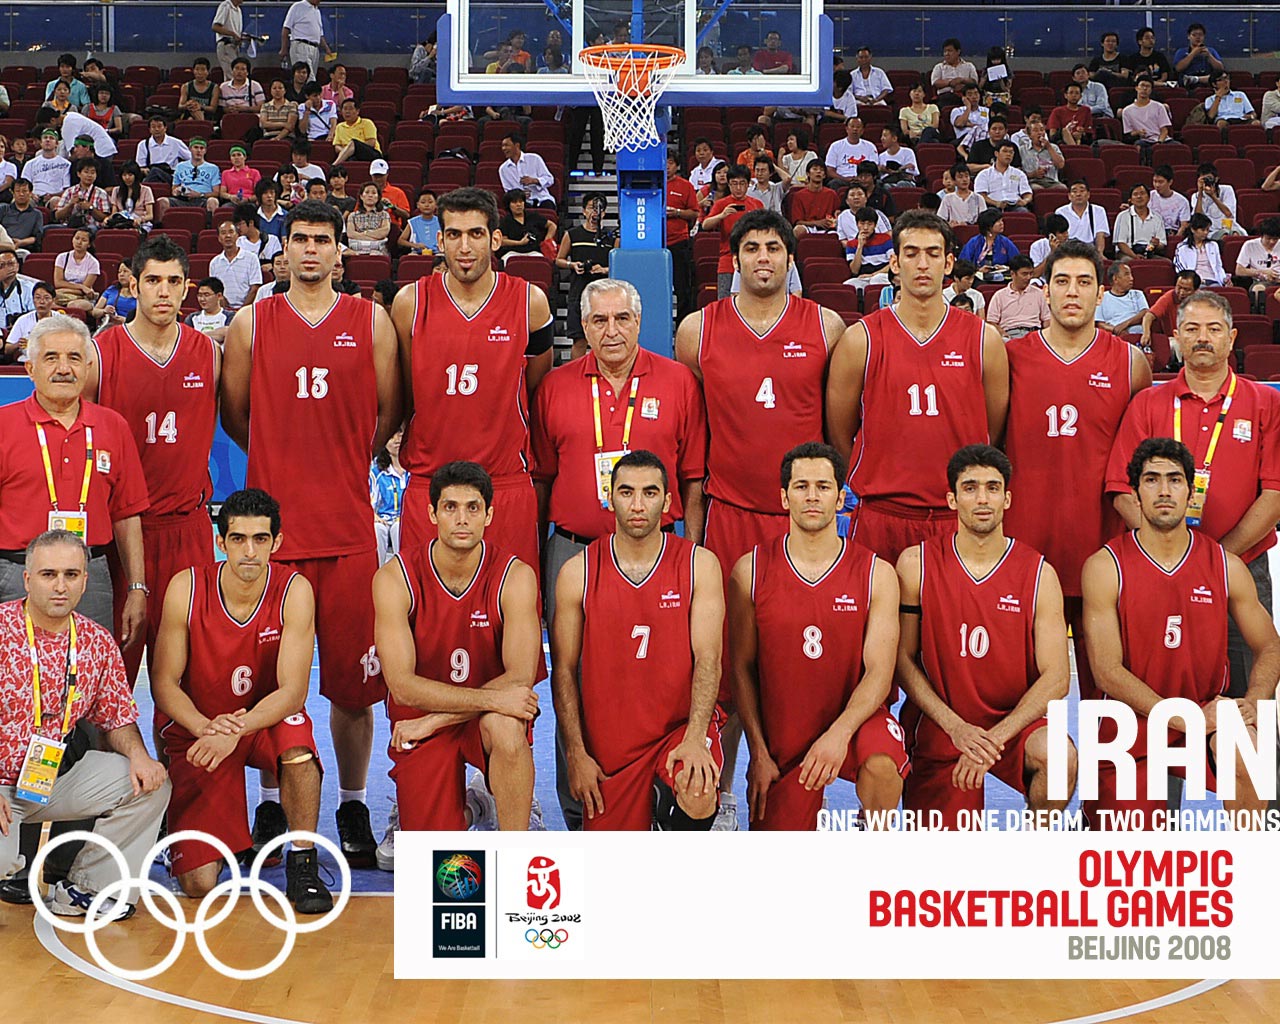  wallpaper of Iranian basketball team for Olympics in Beijing 2008 made 